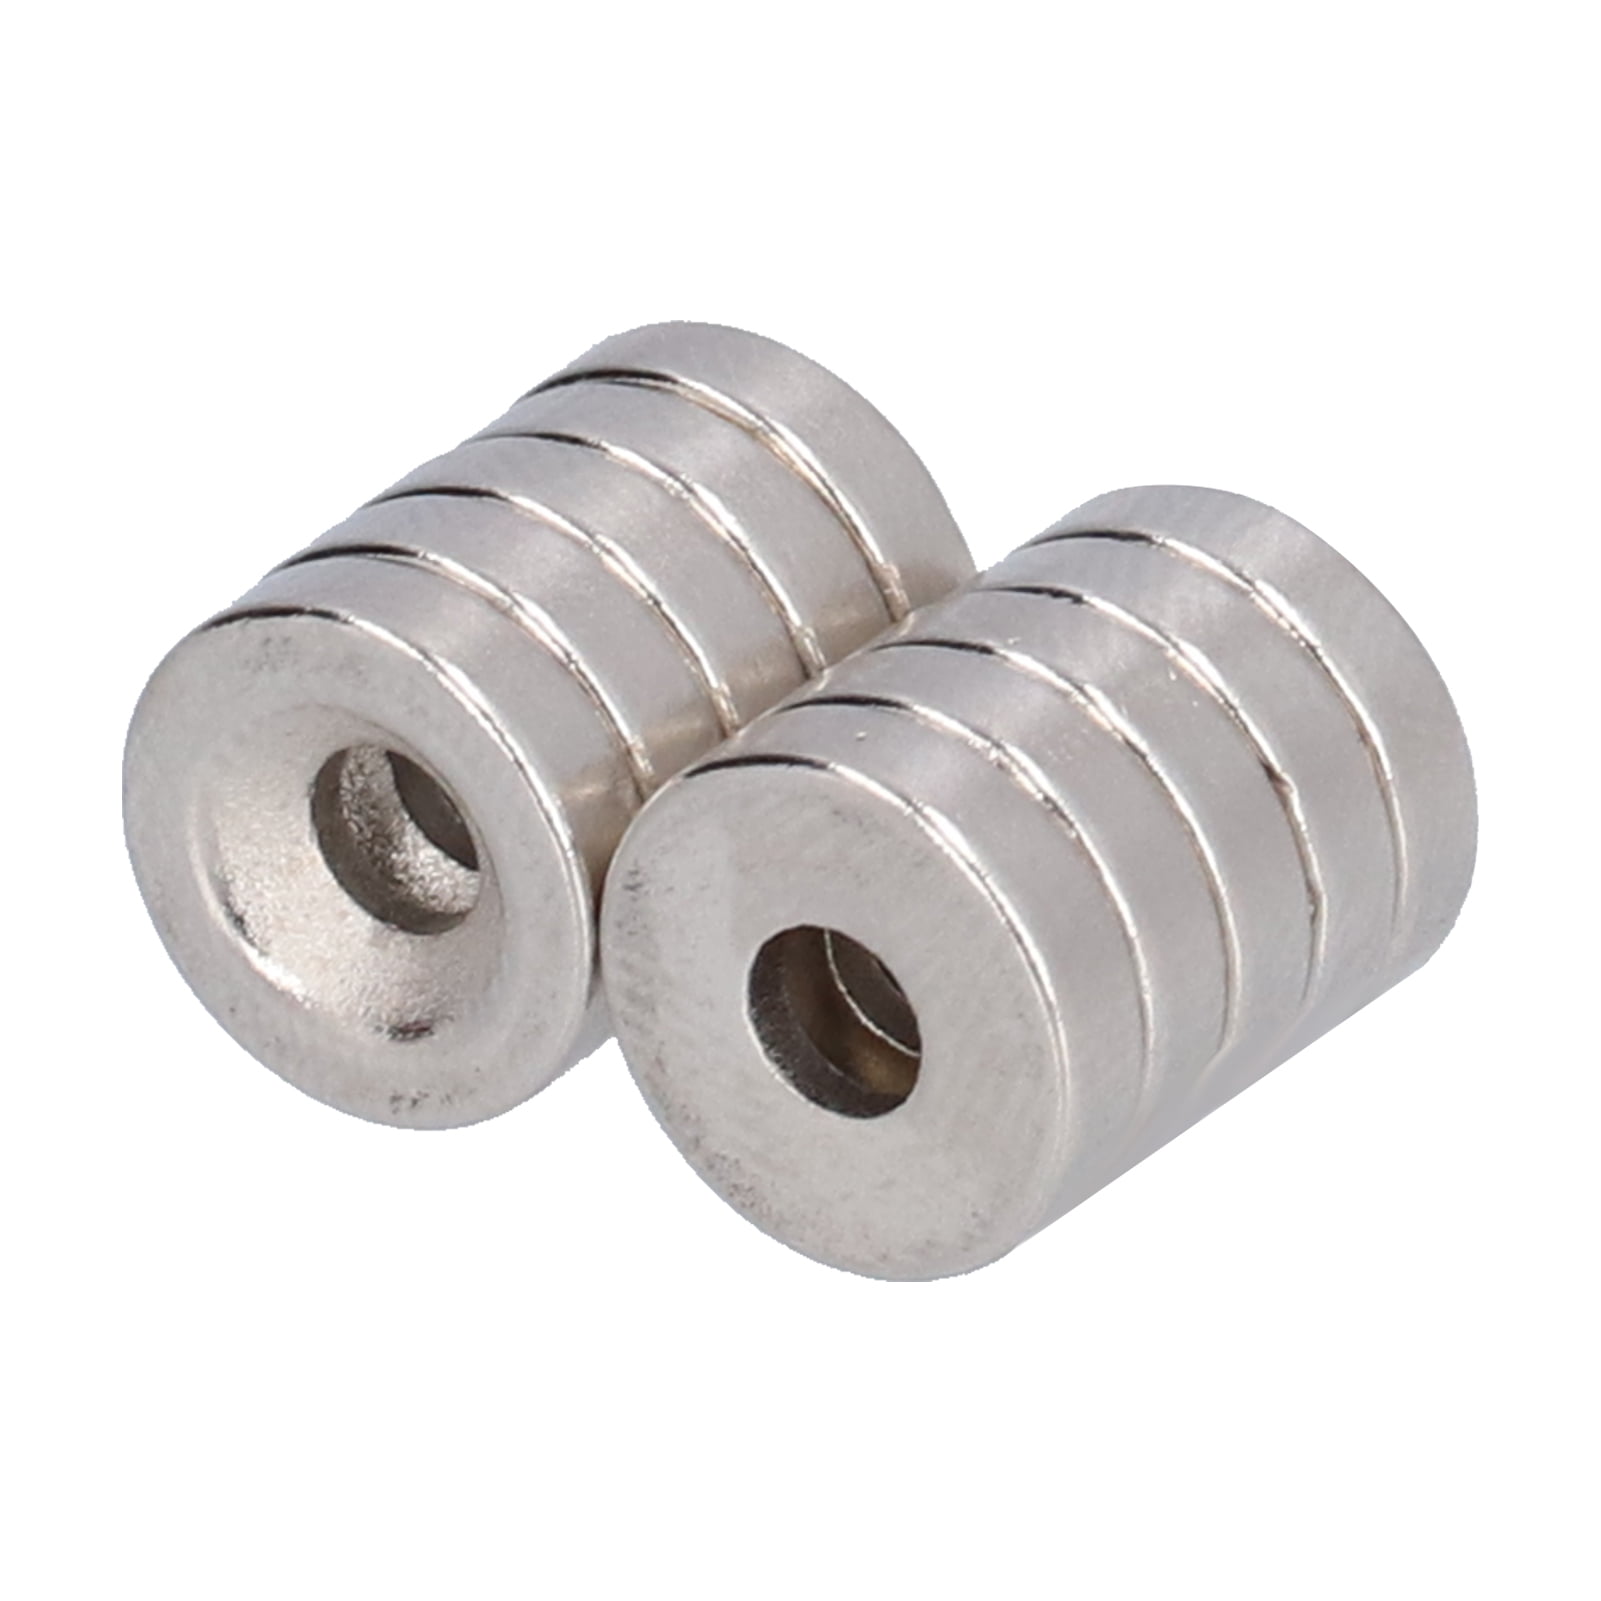 5-50pcs N50 Strong Round Ring Magnets 20mm x 4mm Hole 5mm Rare Earth Neodymium 